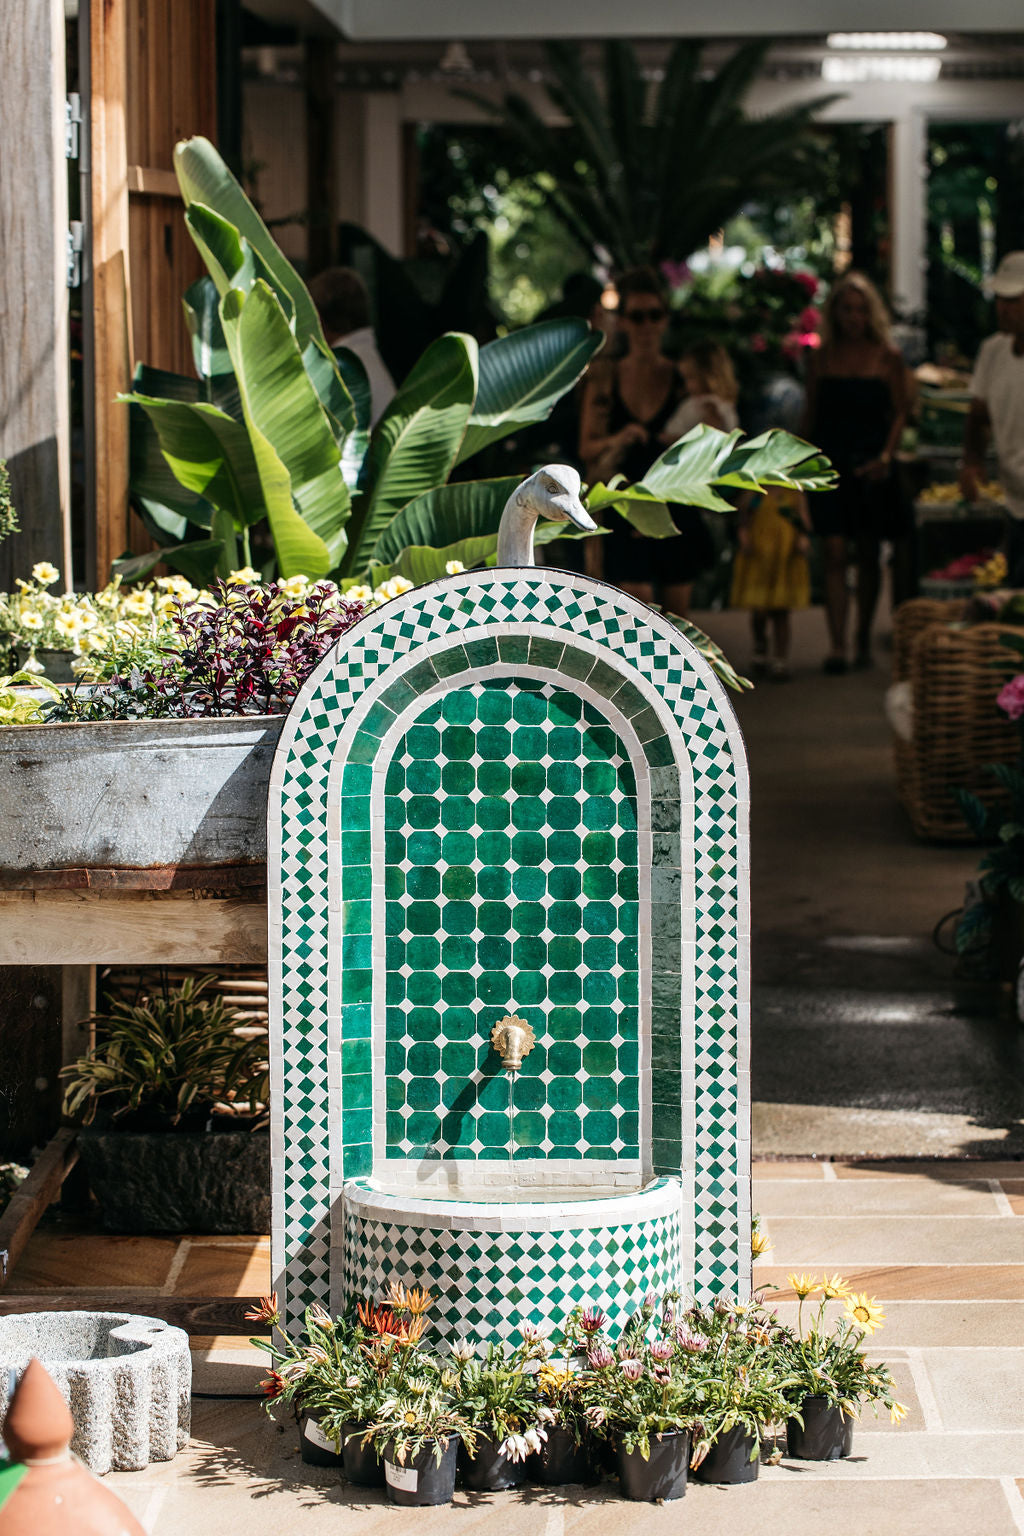 Moroccan Green Fountain with Checks Round Top